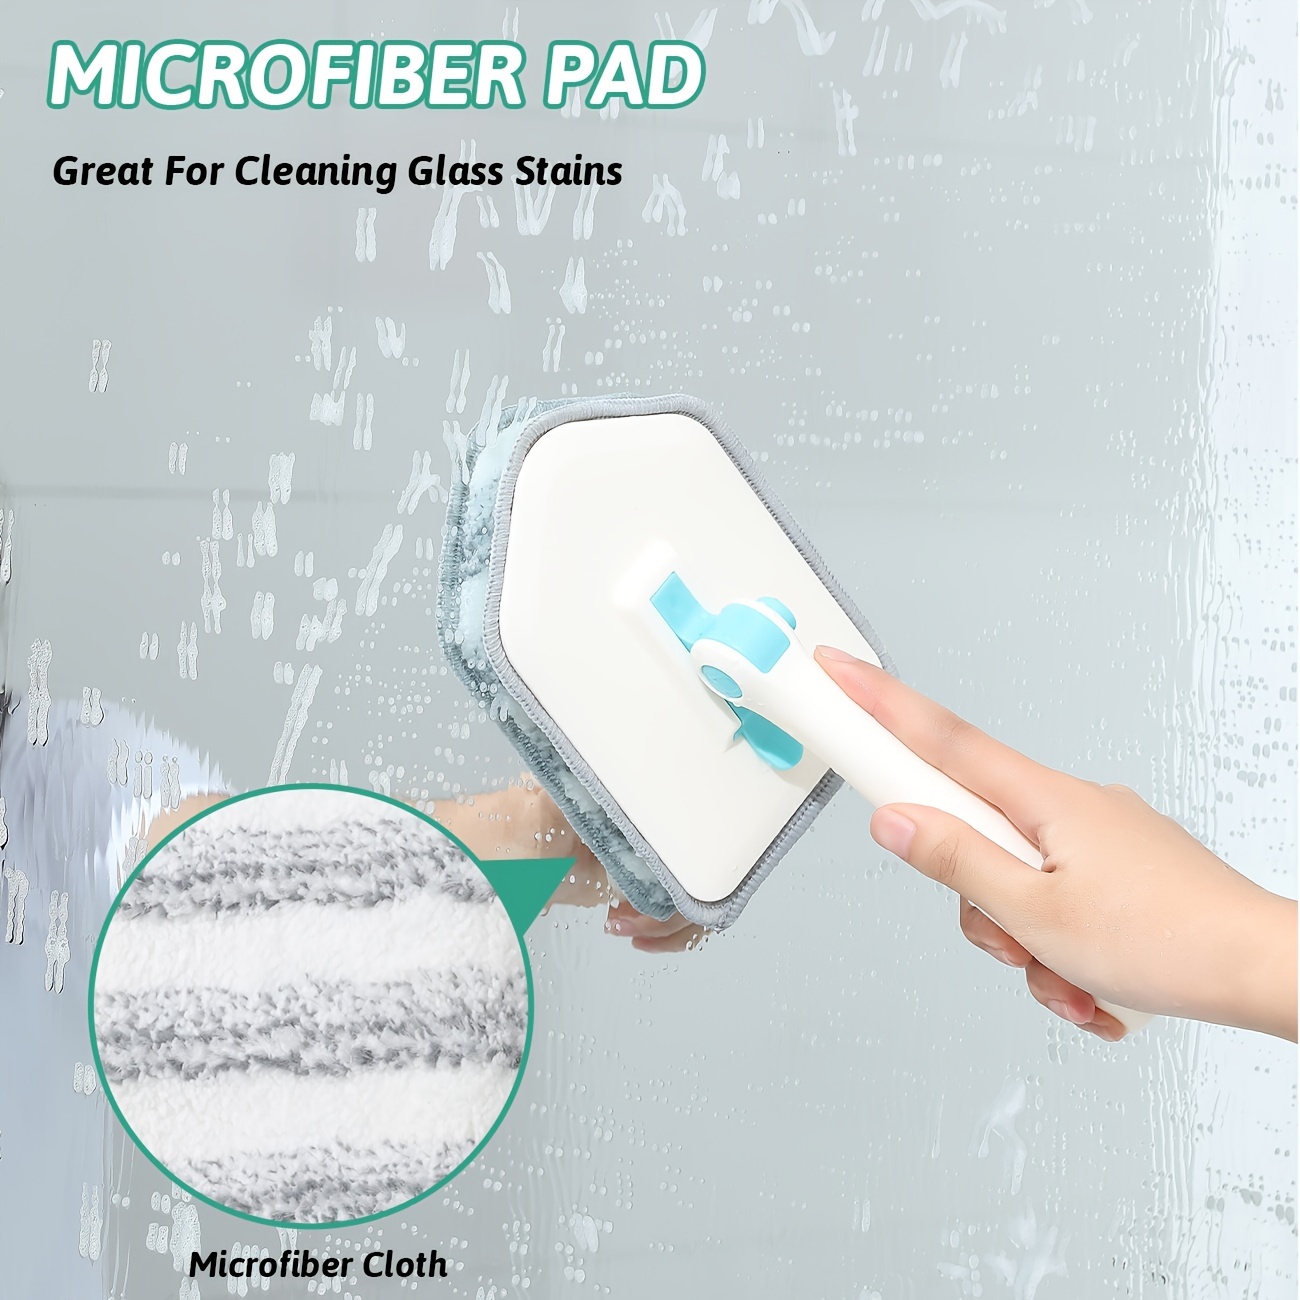 3 in 1 Shower Scrubber Cleaning Brush with 49'' Long Handle, FUUNSOO Tub &  Tile Grout Brush Stiff Bristles Lock in Place Scrub Brush Head for Bathroom